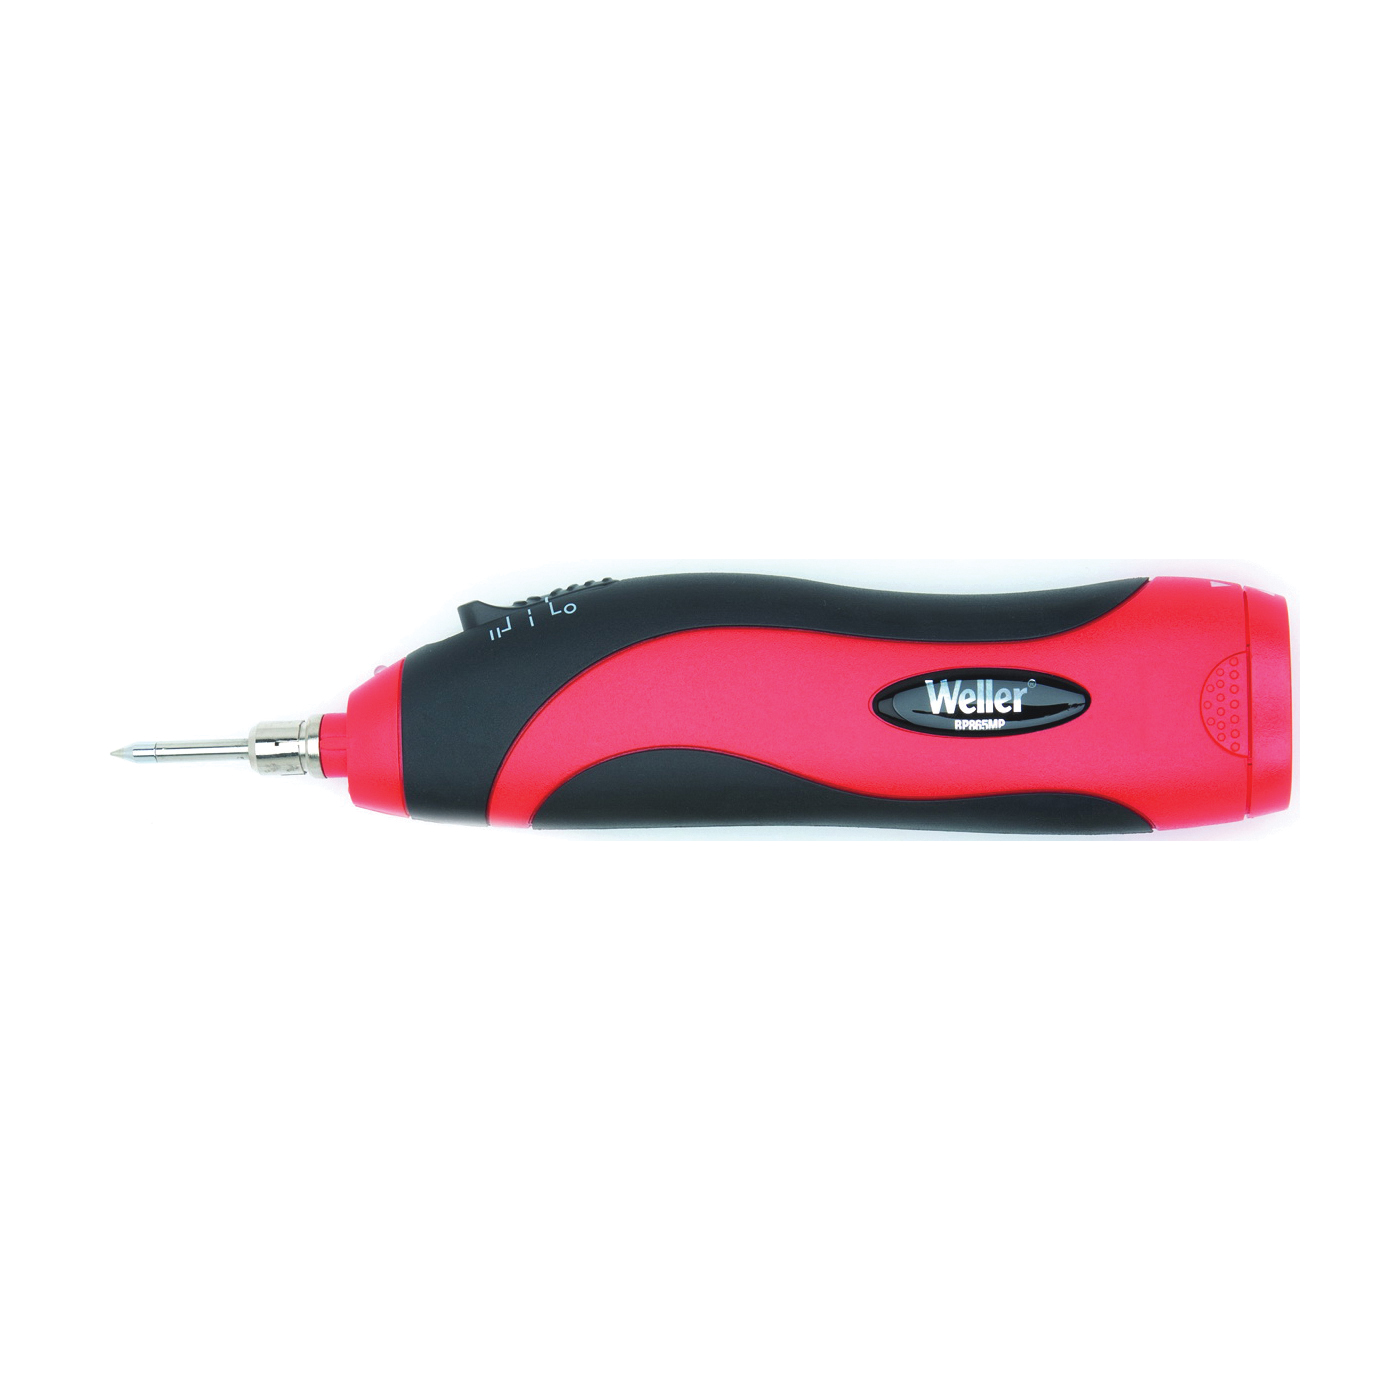 BP865MP Soldering Iron, 6 V, 6 to 8 W, Conical Tip